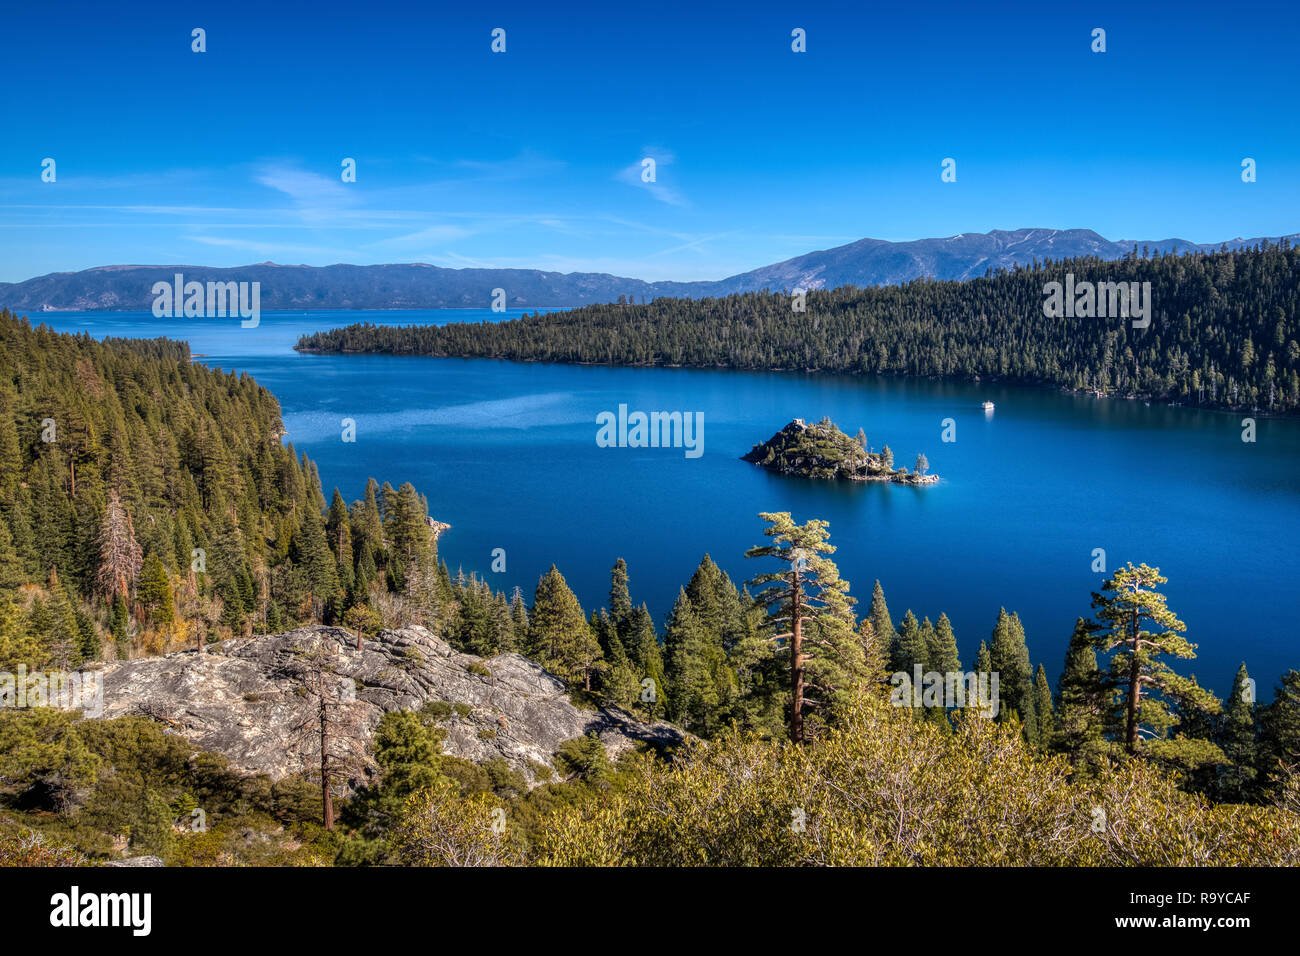 Stunning panoramic view of Emerald Bay and Fannette Island from a scenic overlook at Emerald Bay State Park, South Lake Tahoe, California Stock Photo